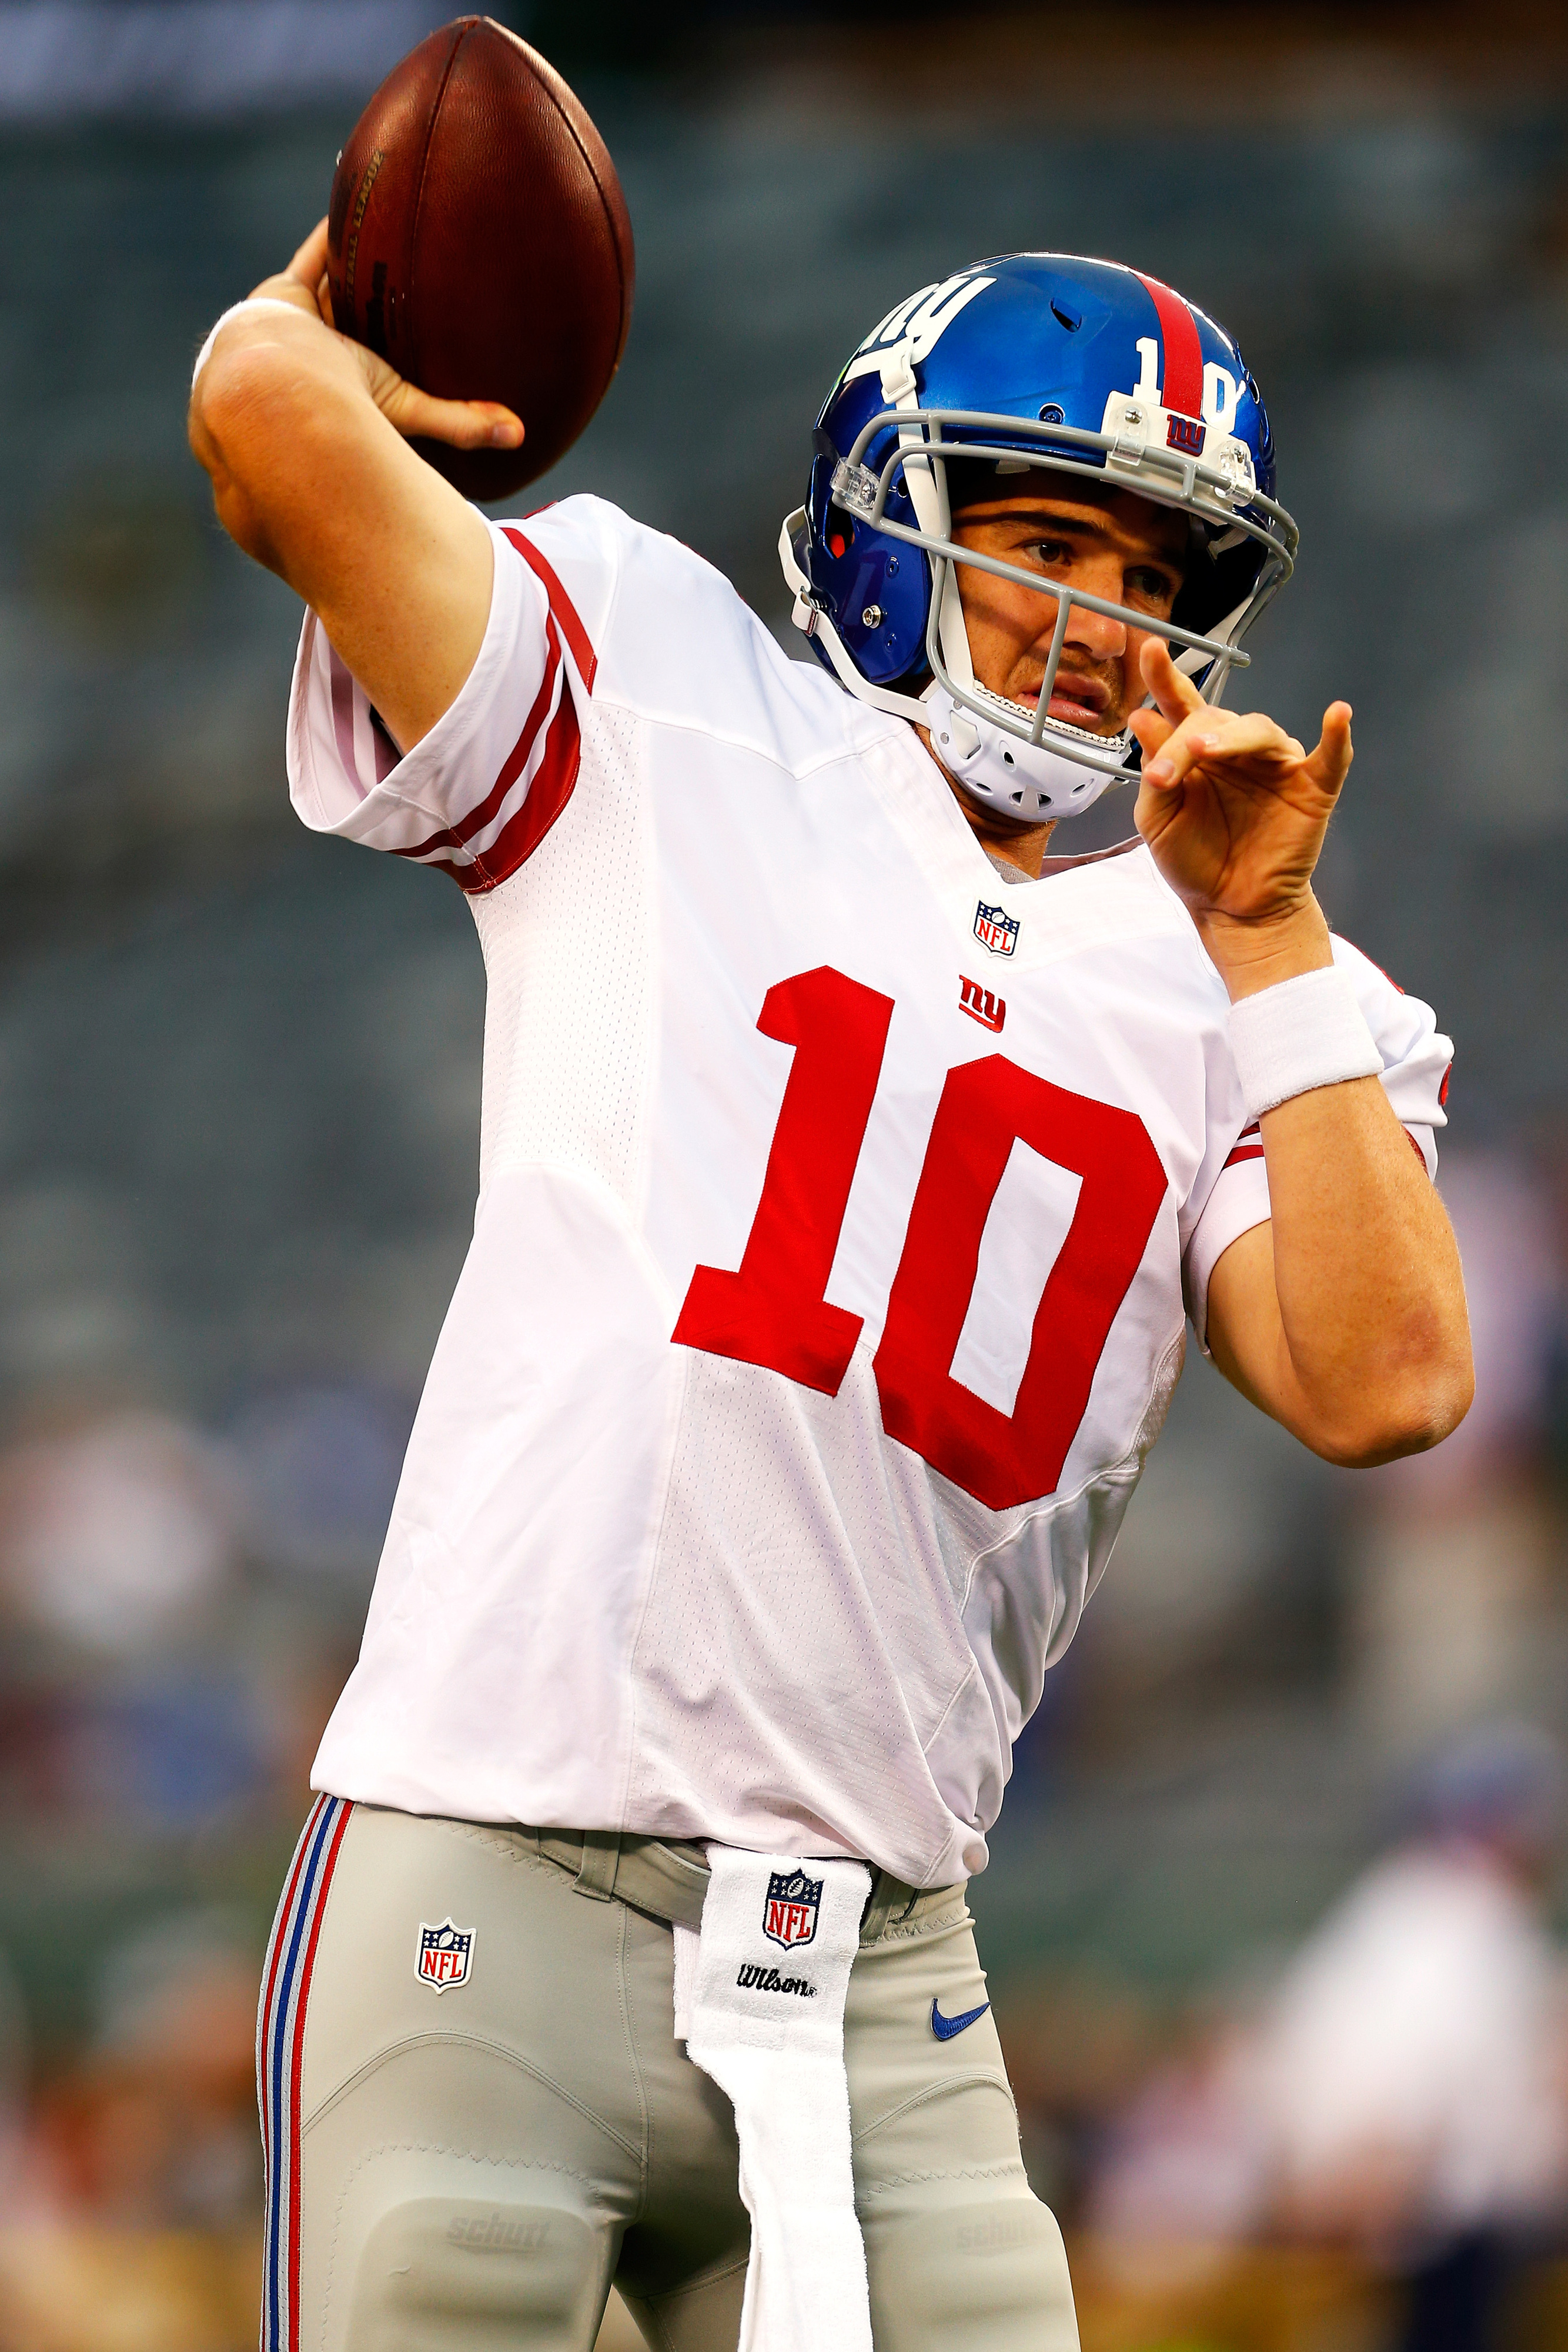 Eli Manning warming up before the game